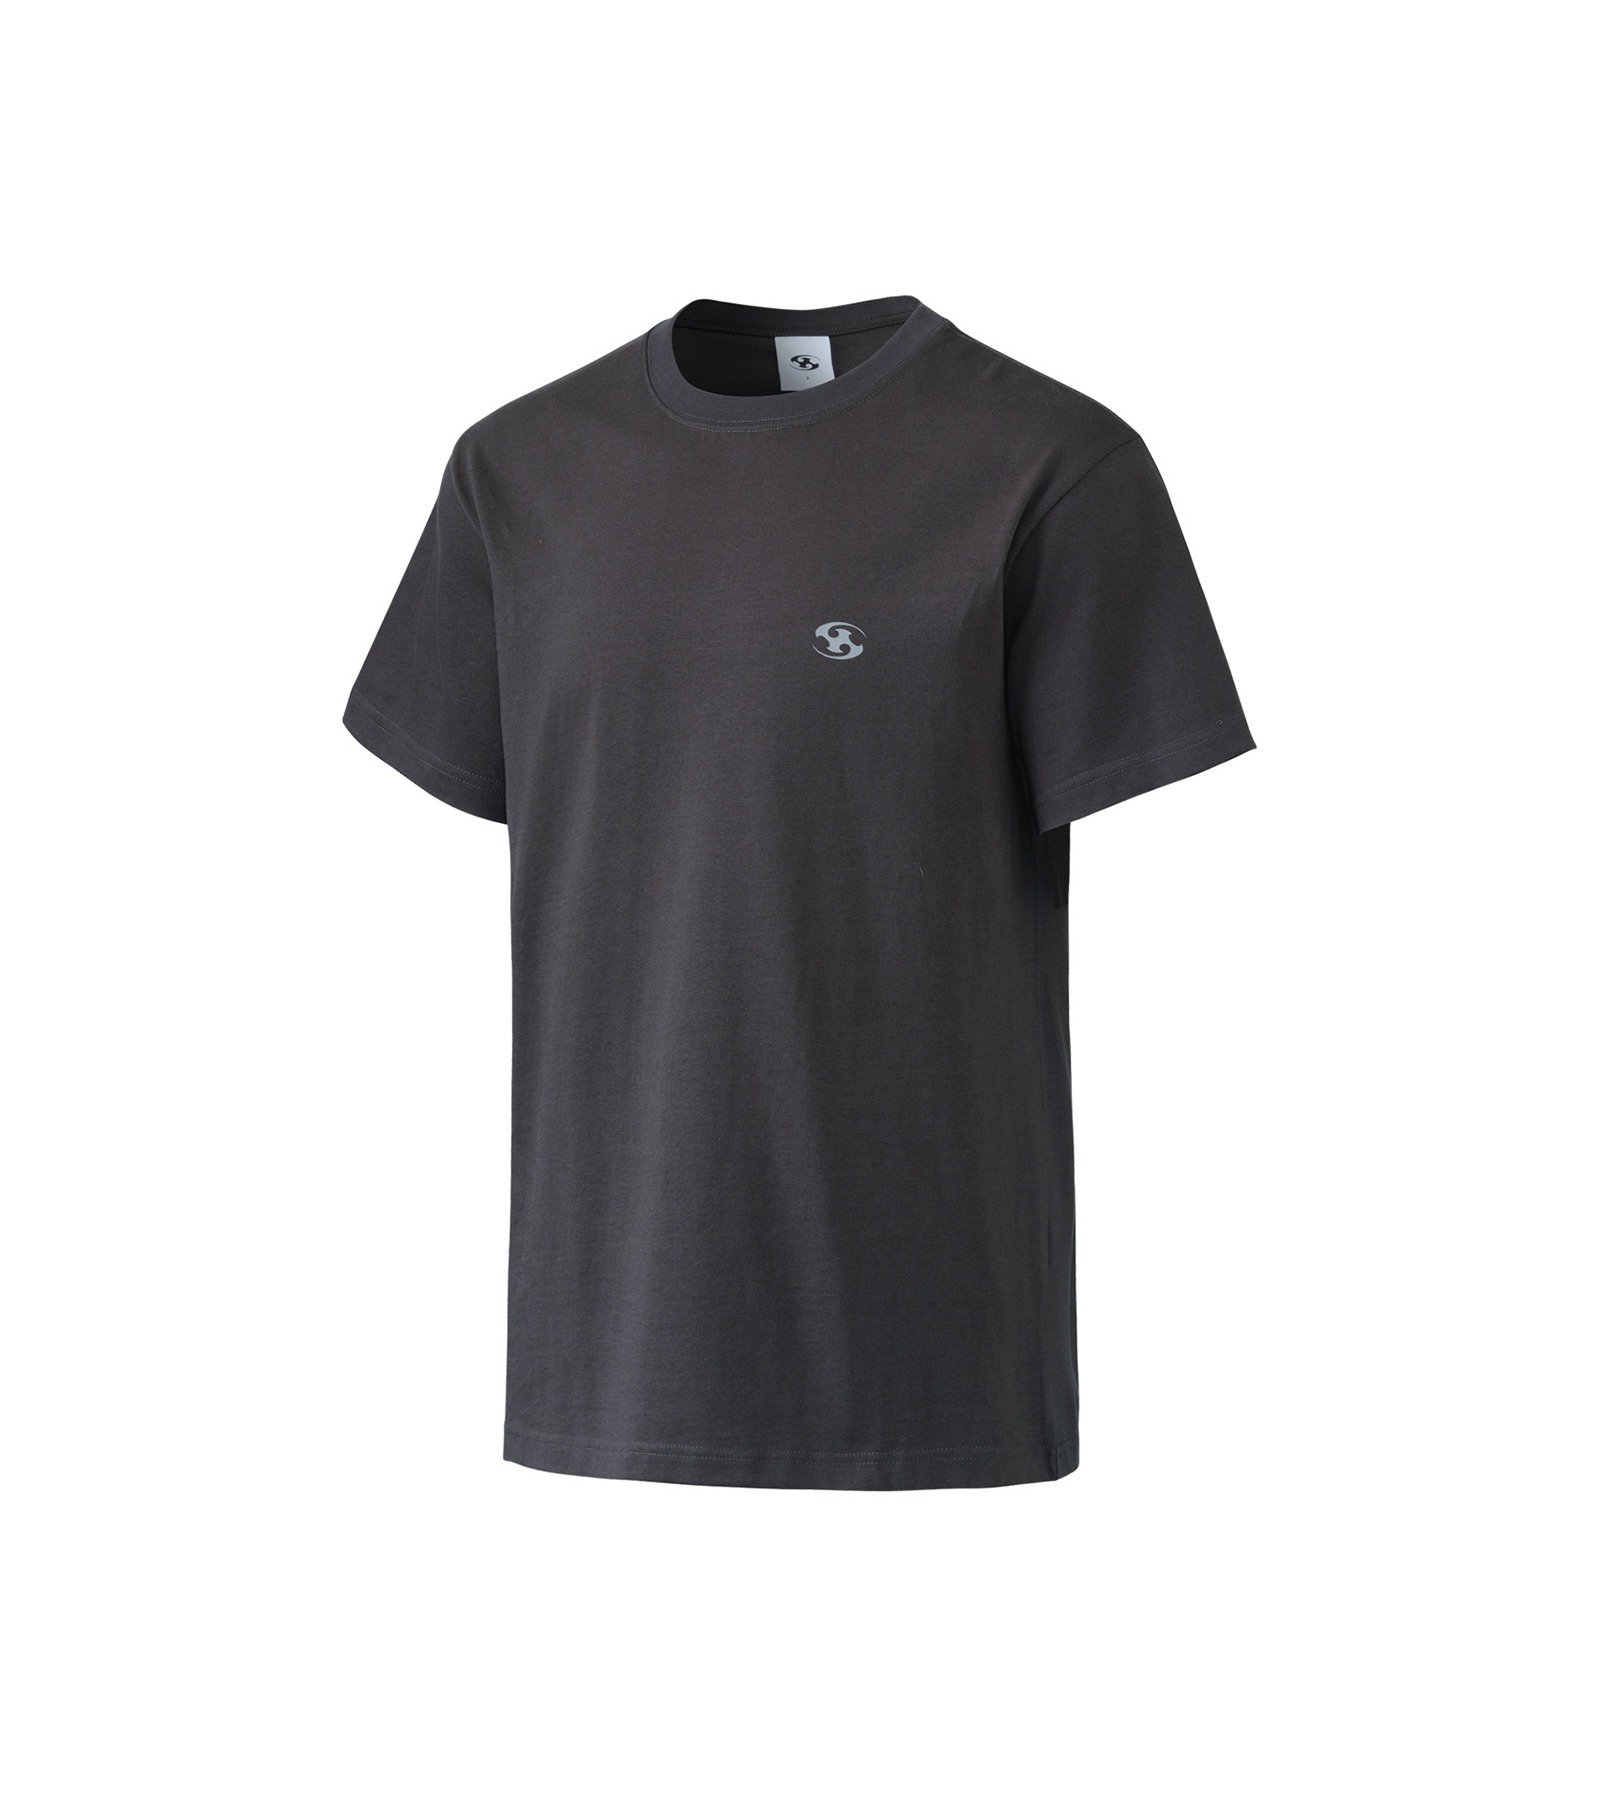 Forest T-shirt (Charcoal)